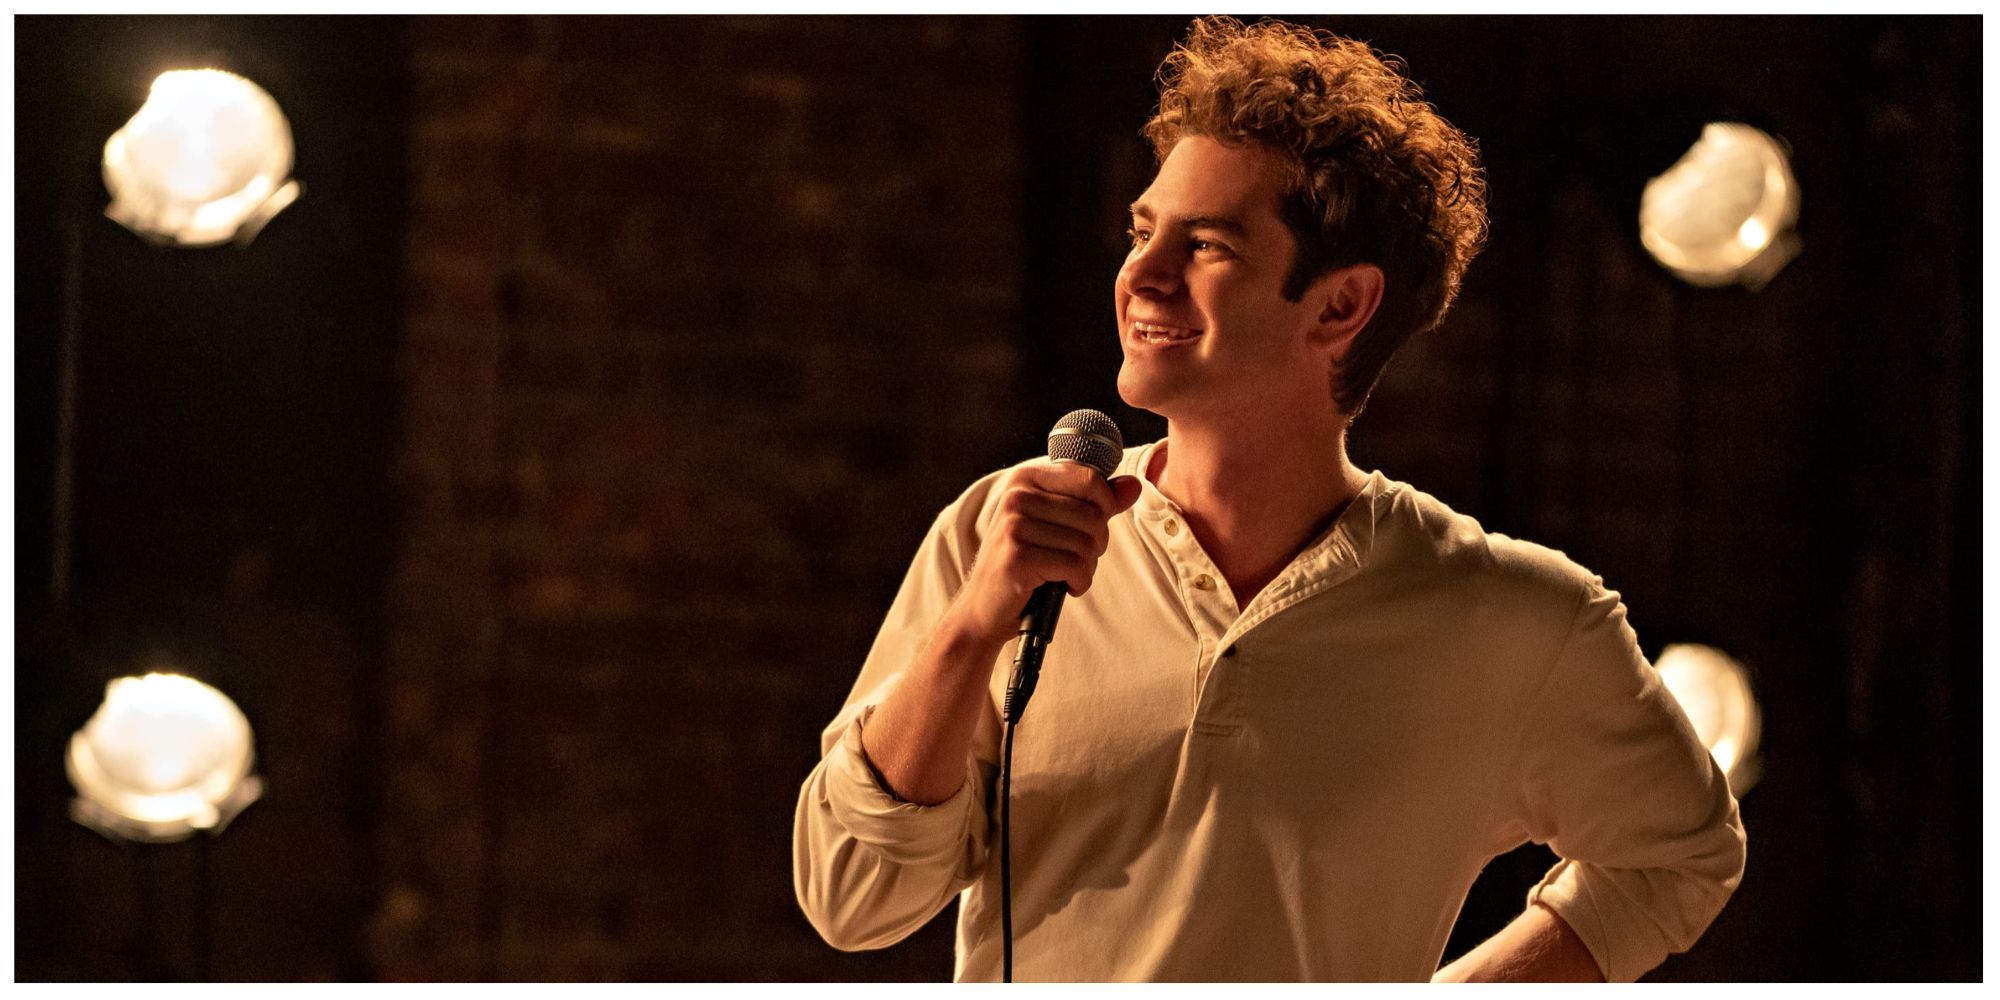 Andrew Garfield in Tick Tick Boom smiling on stage with a microphone